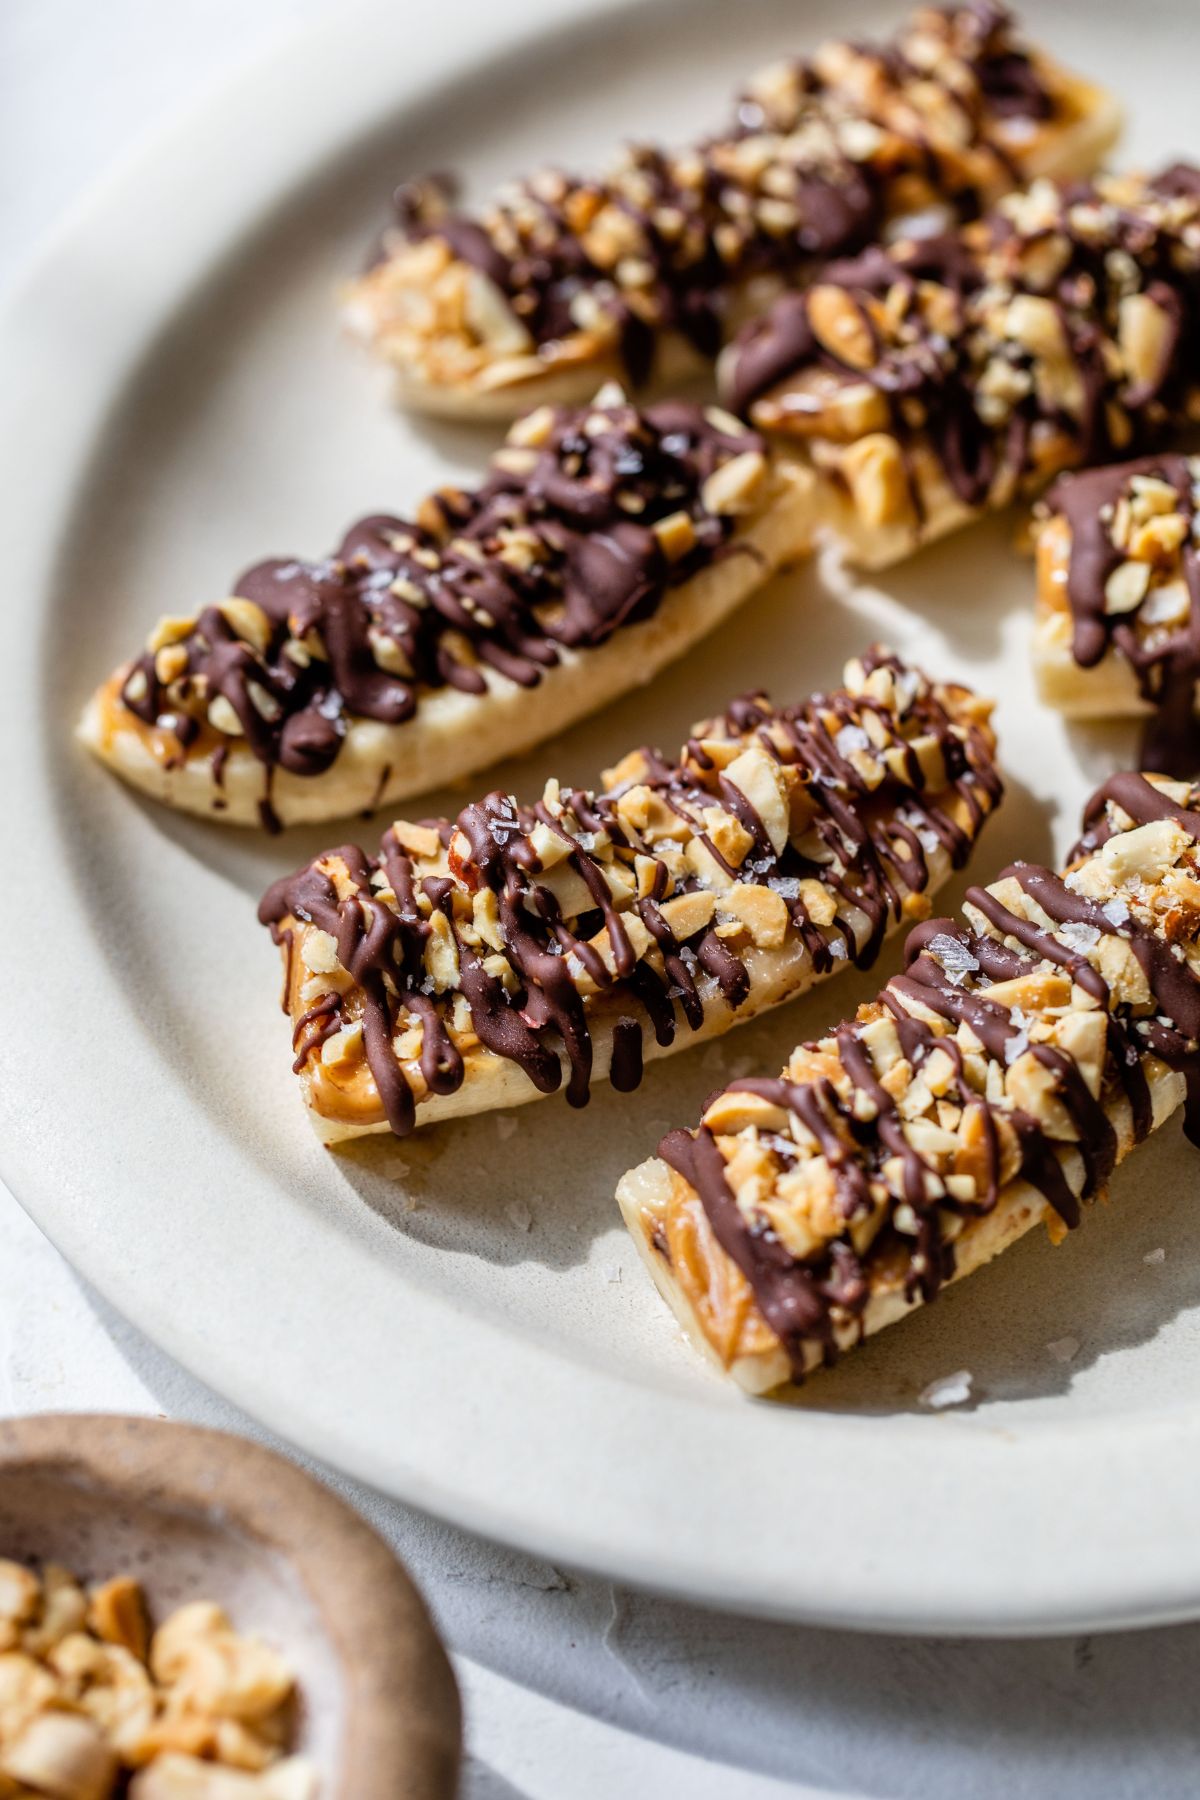 Chocolate covered bananas on a white plate.